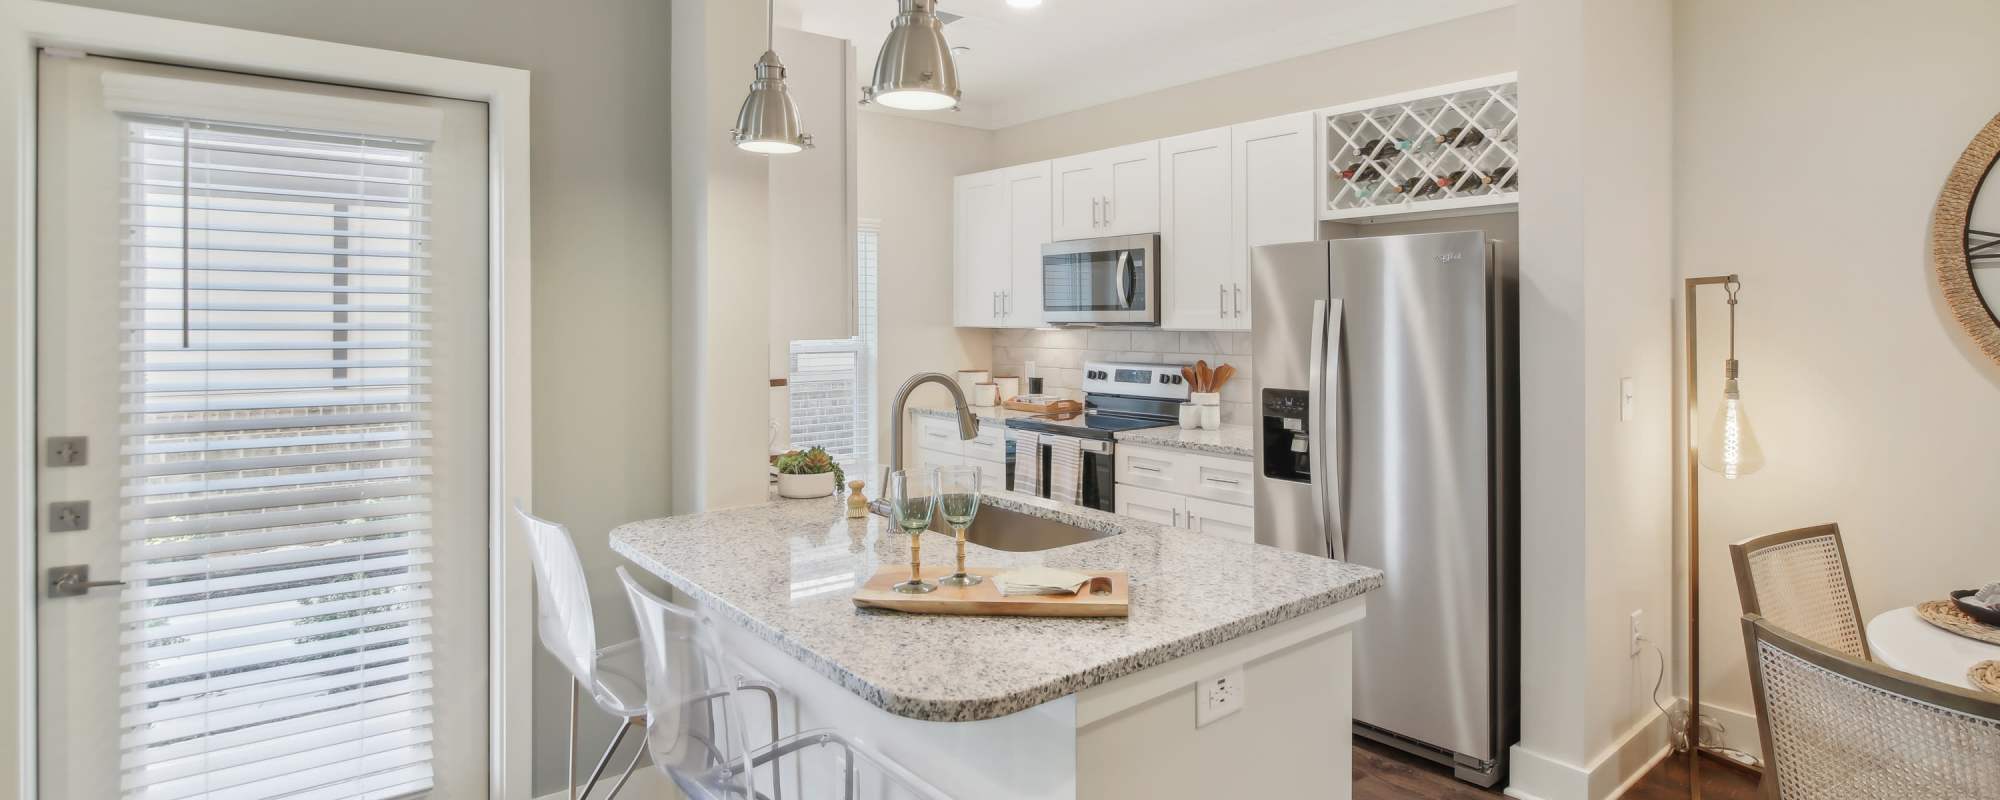 Model kitchen with white cabinetry, custom backsplash, and stainless-steel appliances at Somerset in McDonough, Georgia